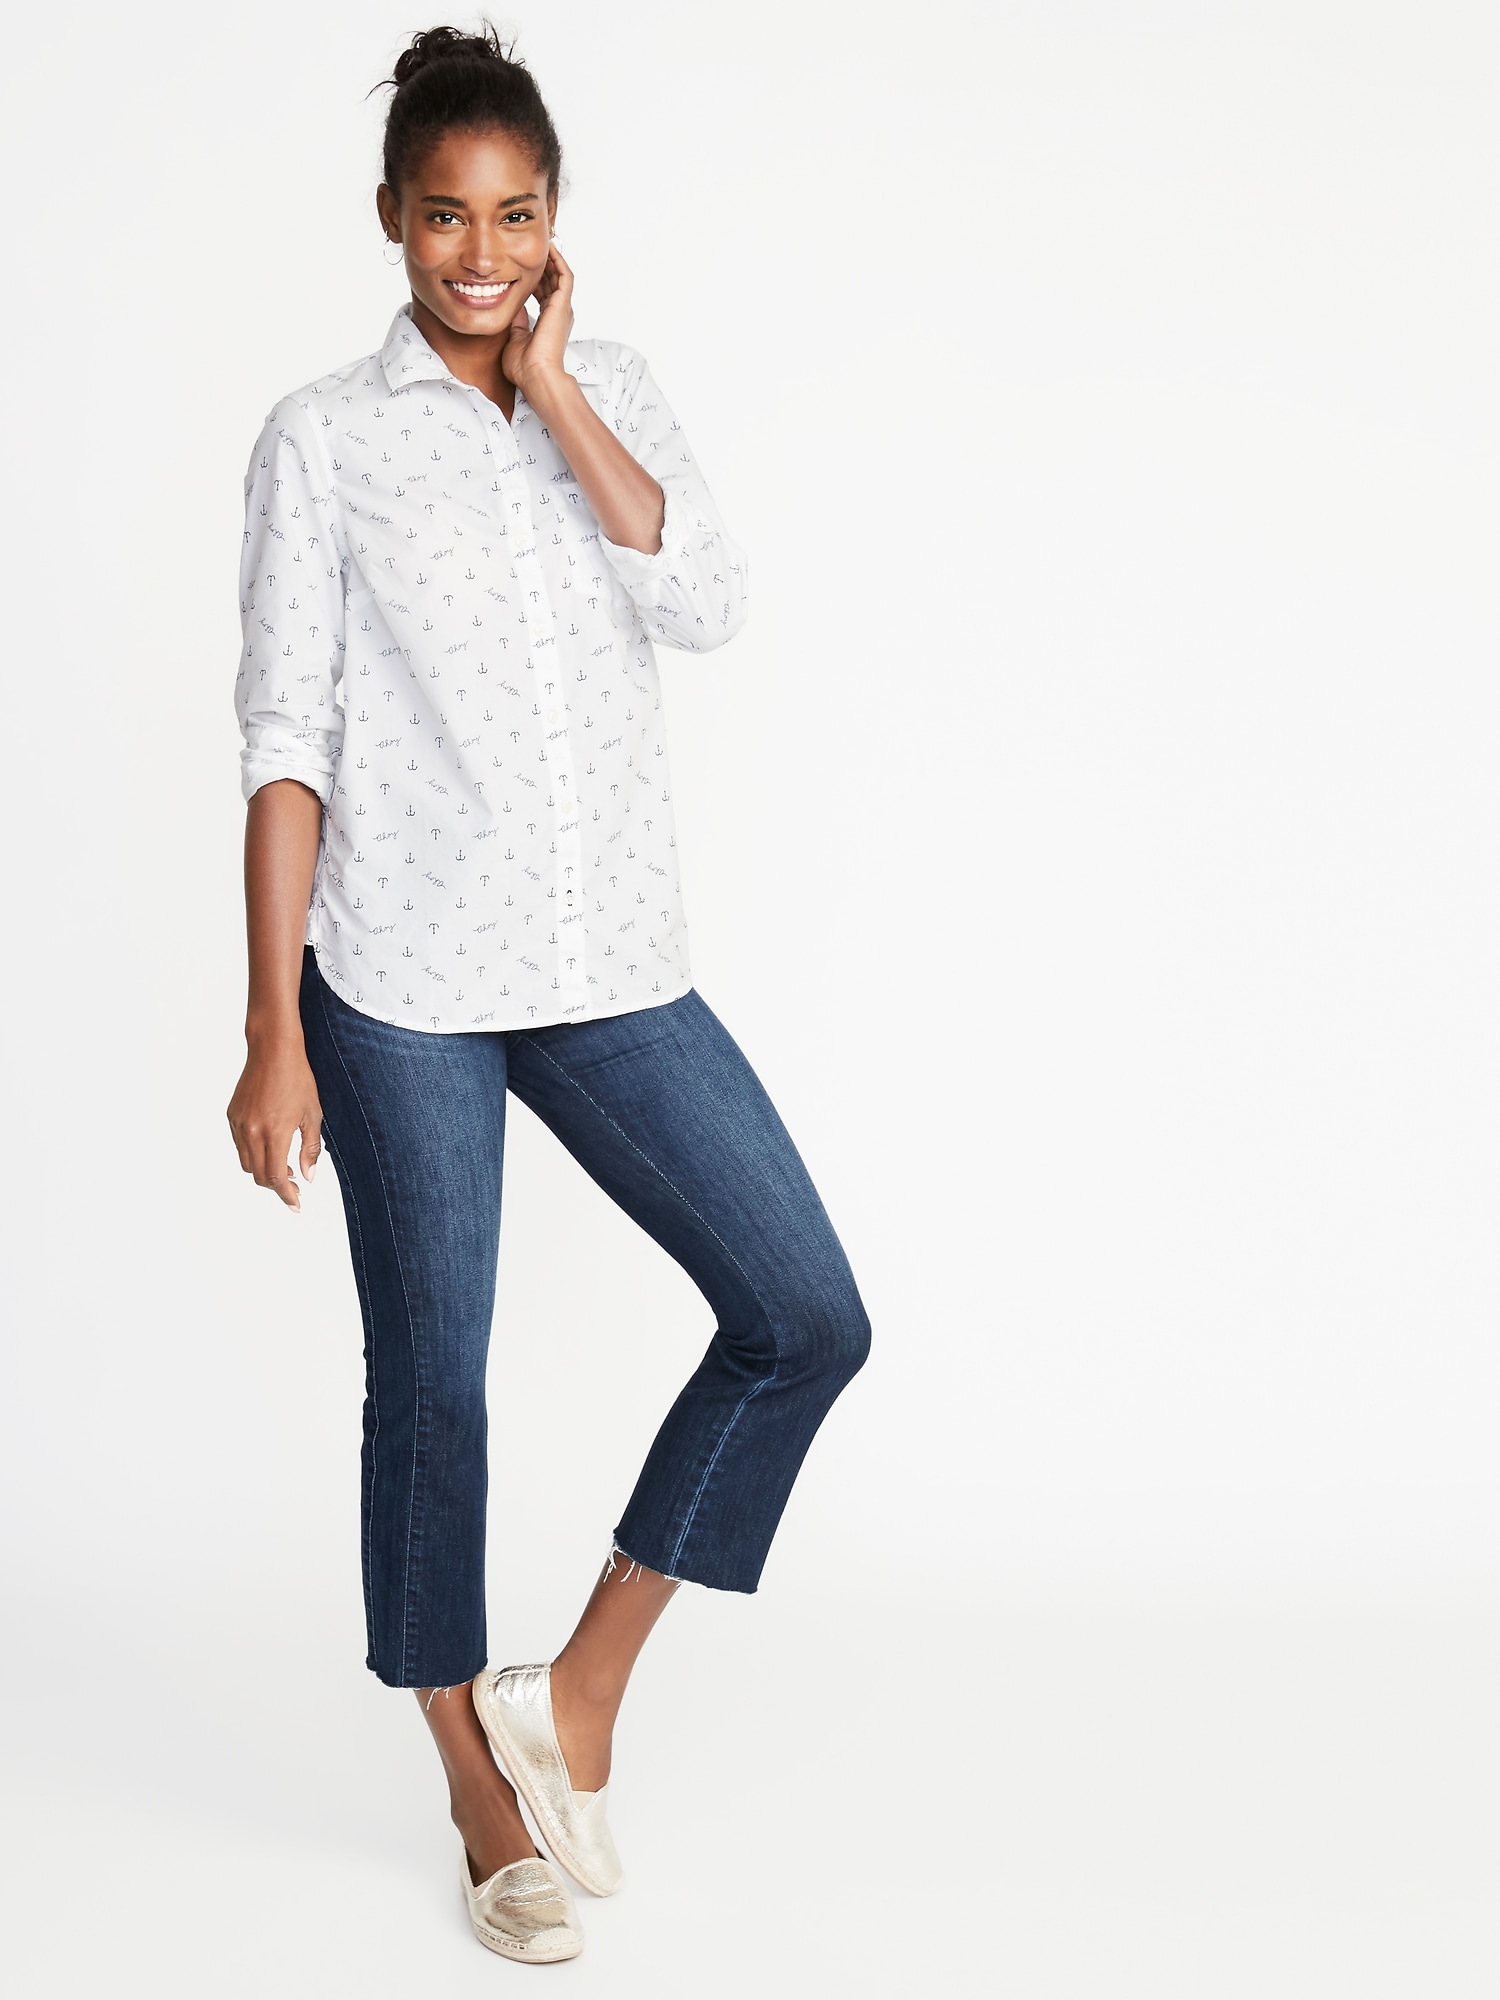 Anchor-Print Classic Shirt for Women | Old Navy